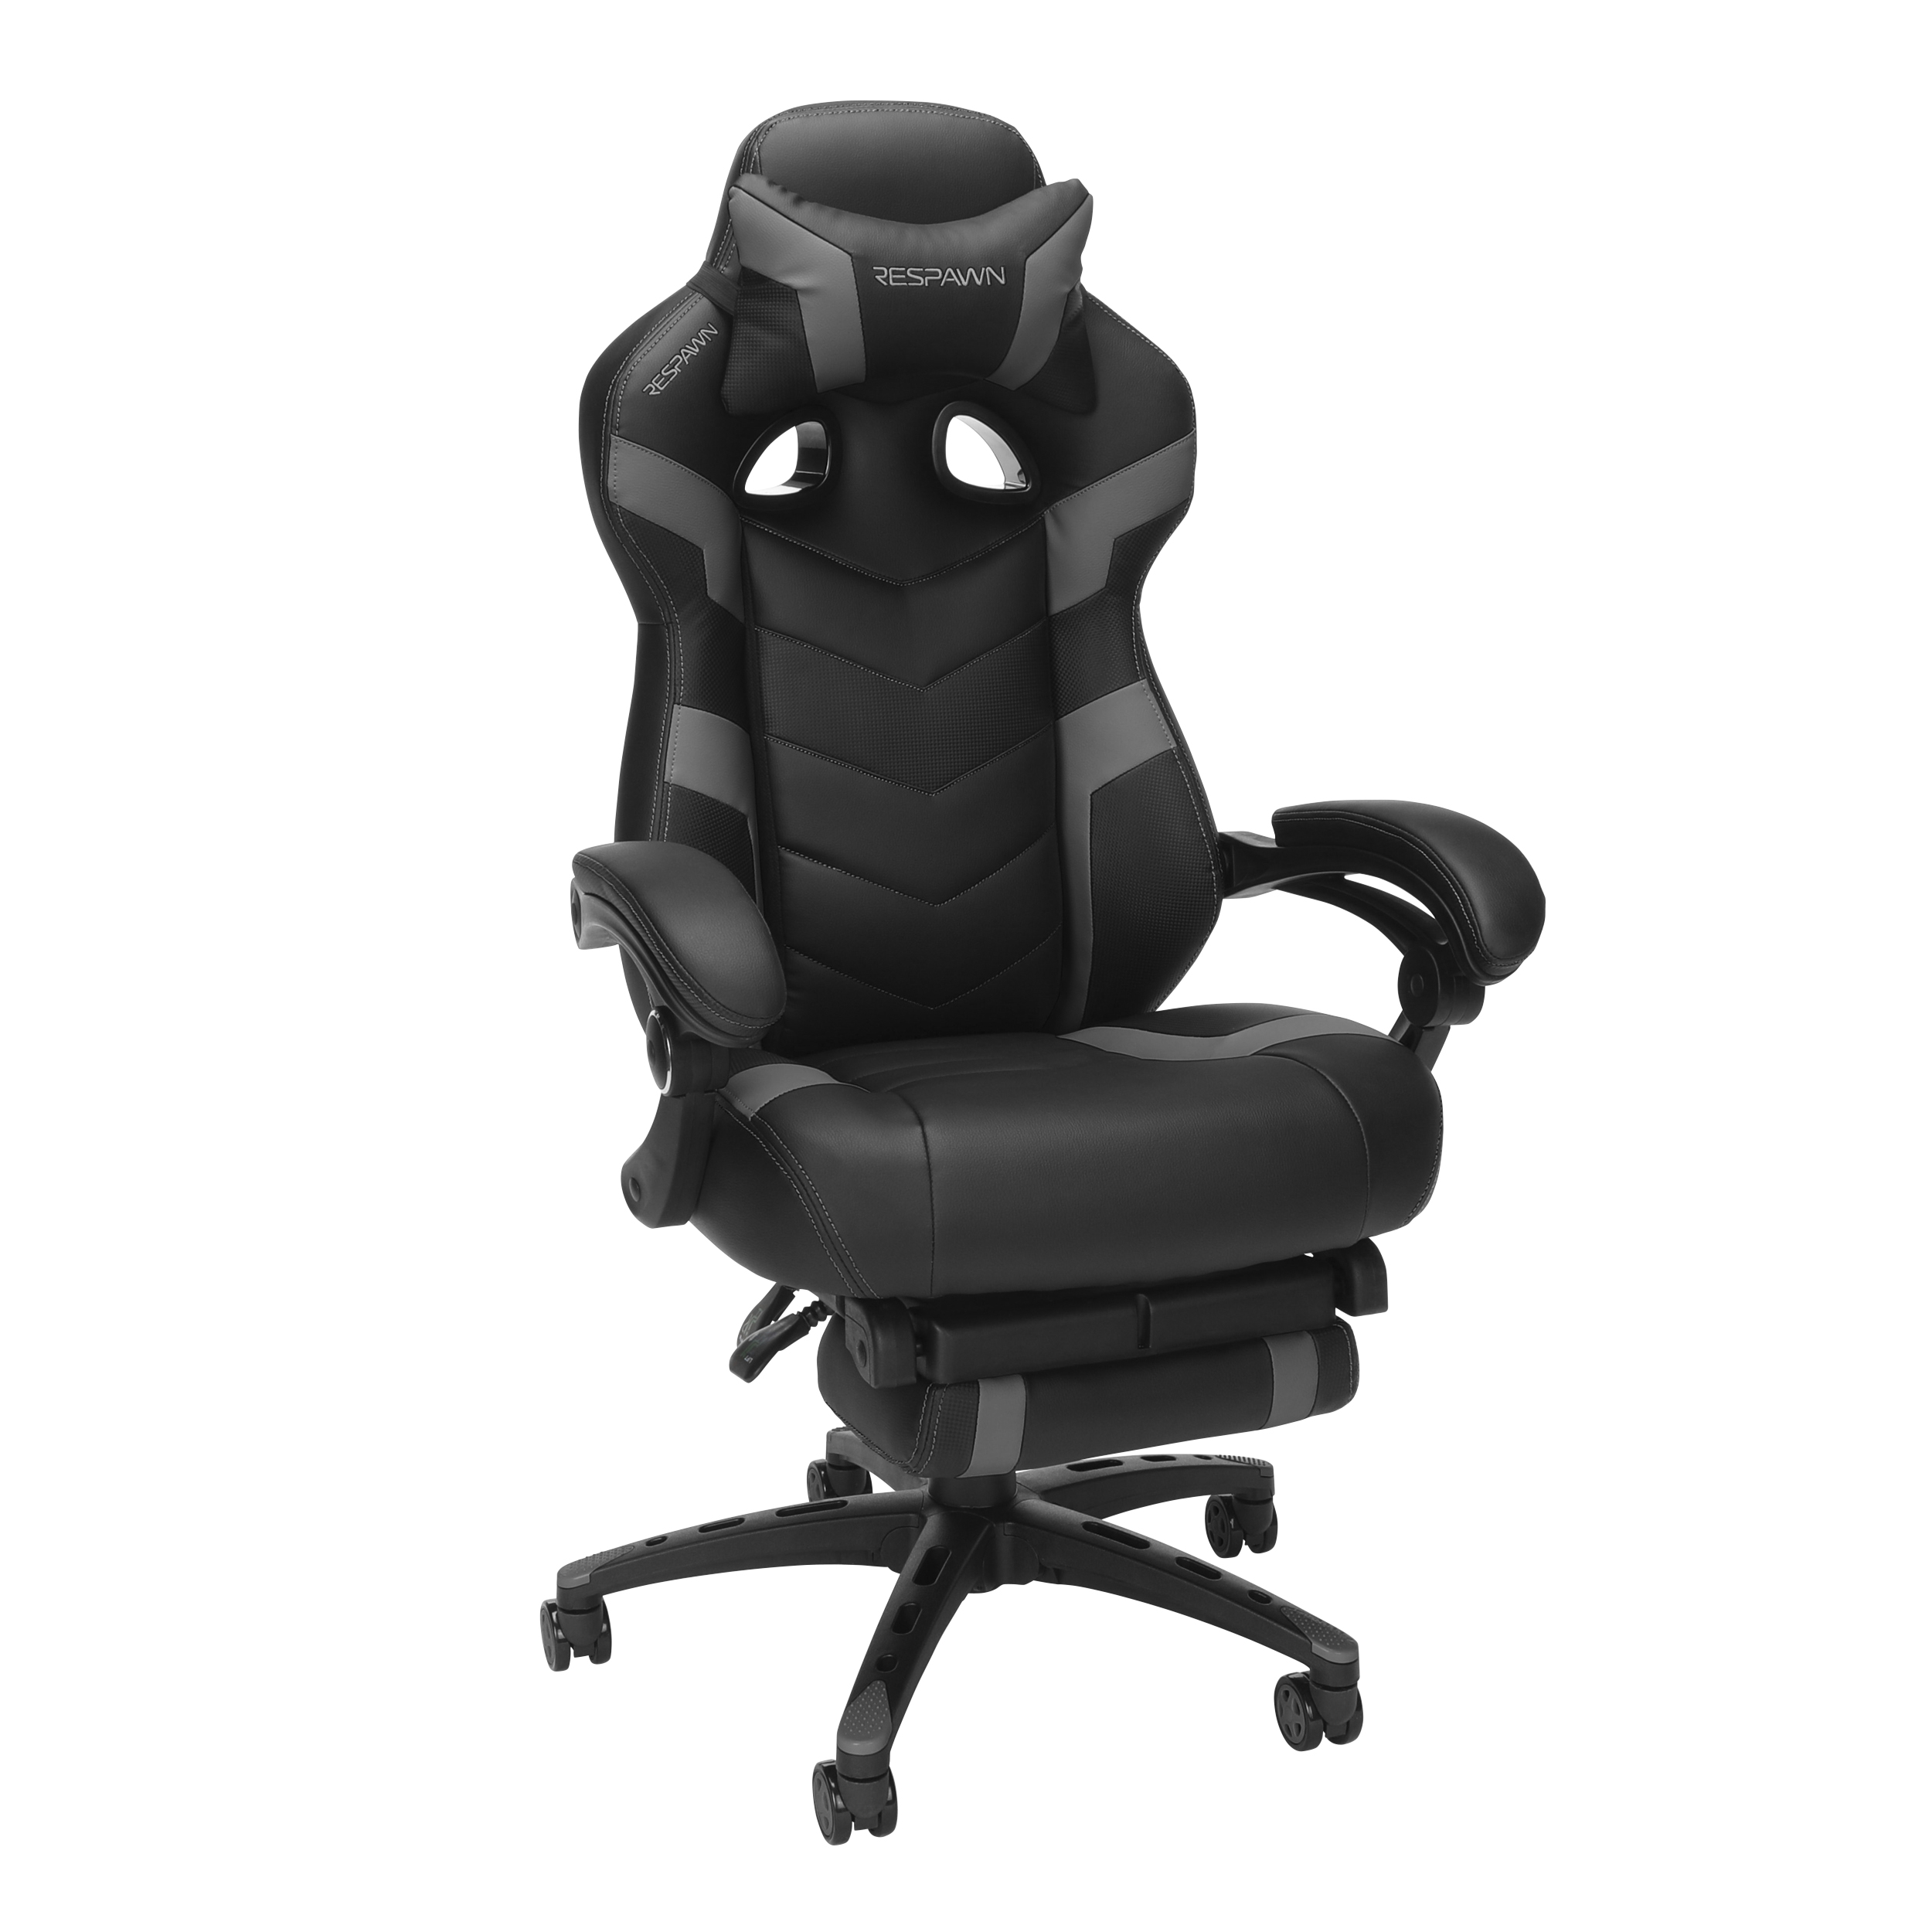 RESPAWN 110 Pro Gaming Chair - Gaming Chair with Footrest, Reclining Gaming Chair, Video Gaming Computer Desk Chair, Adjustable Desk Chair, Gaming Chairs For Adults With Headrest Pillow - Grey - image 1 of 10